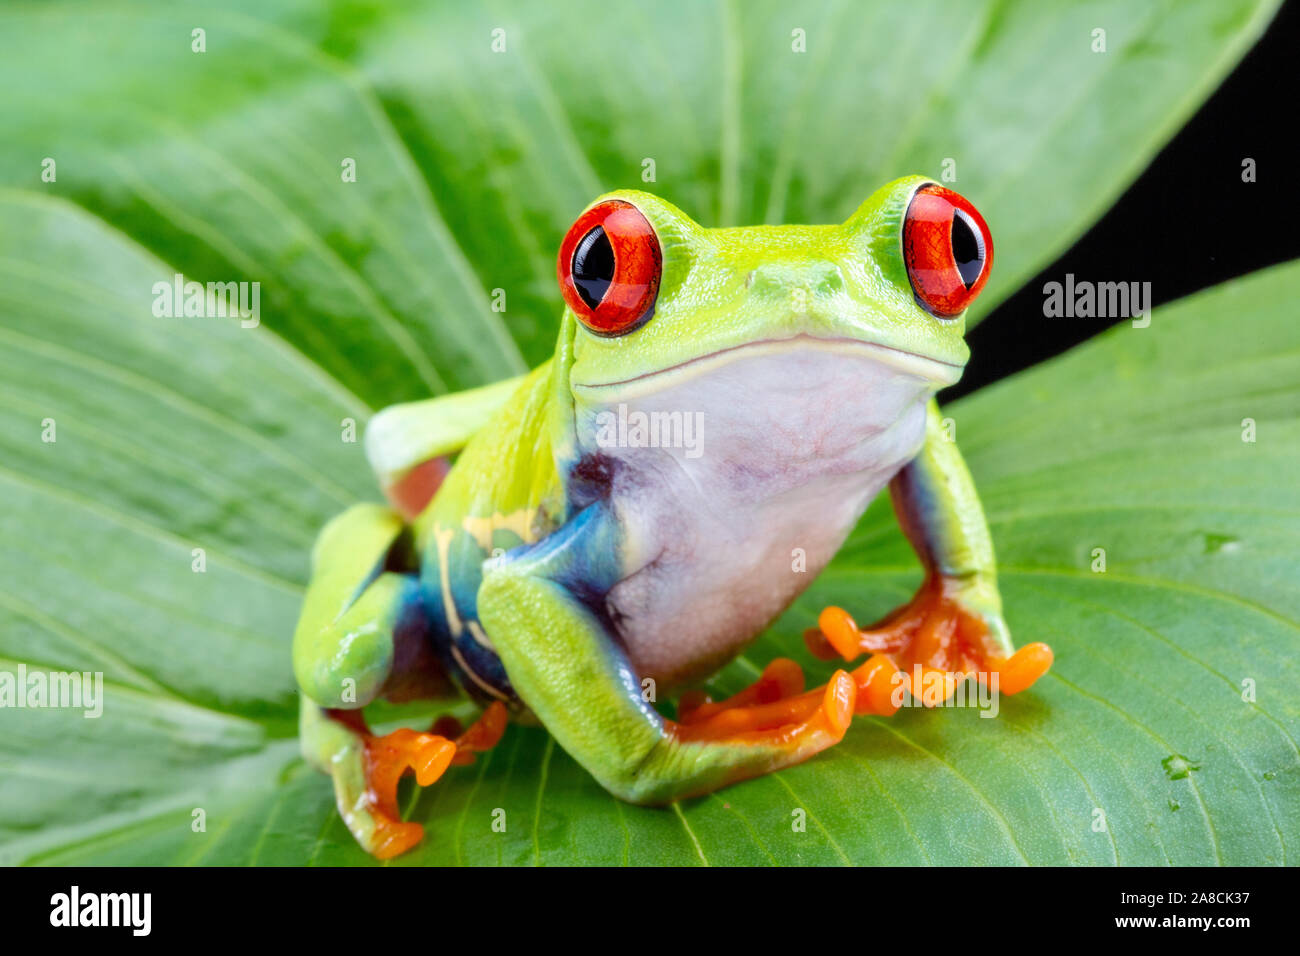 Red Eyed Tree Frog,  Agalychnis Callidryas, on a Leaf with Black Background Stock Photo